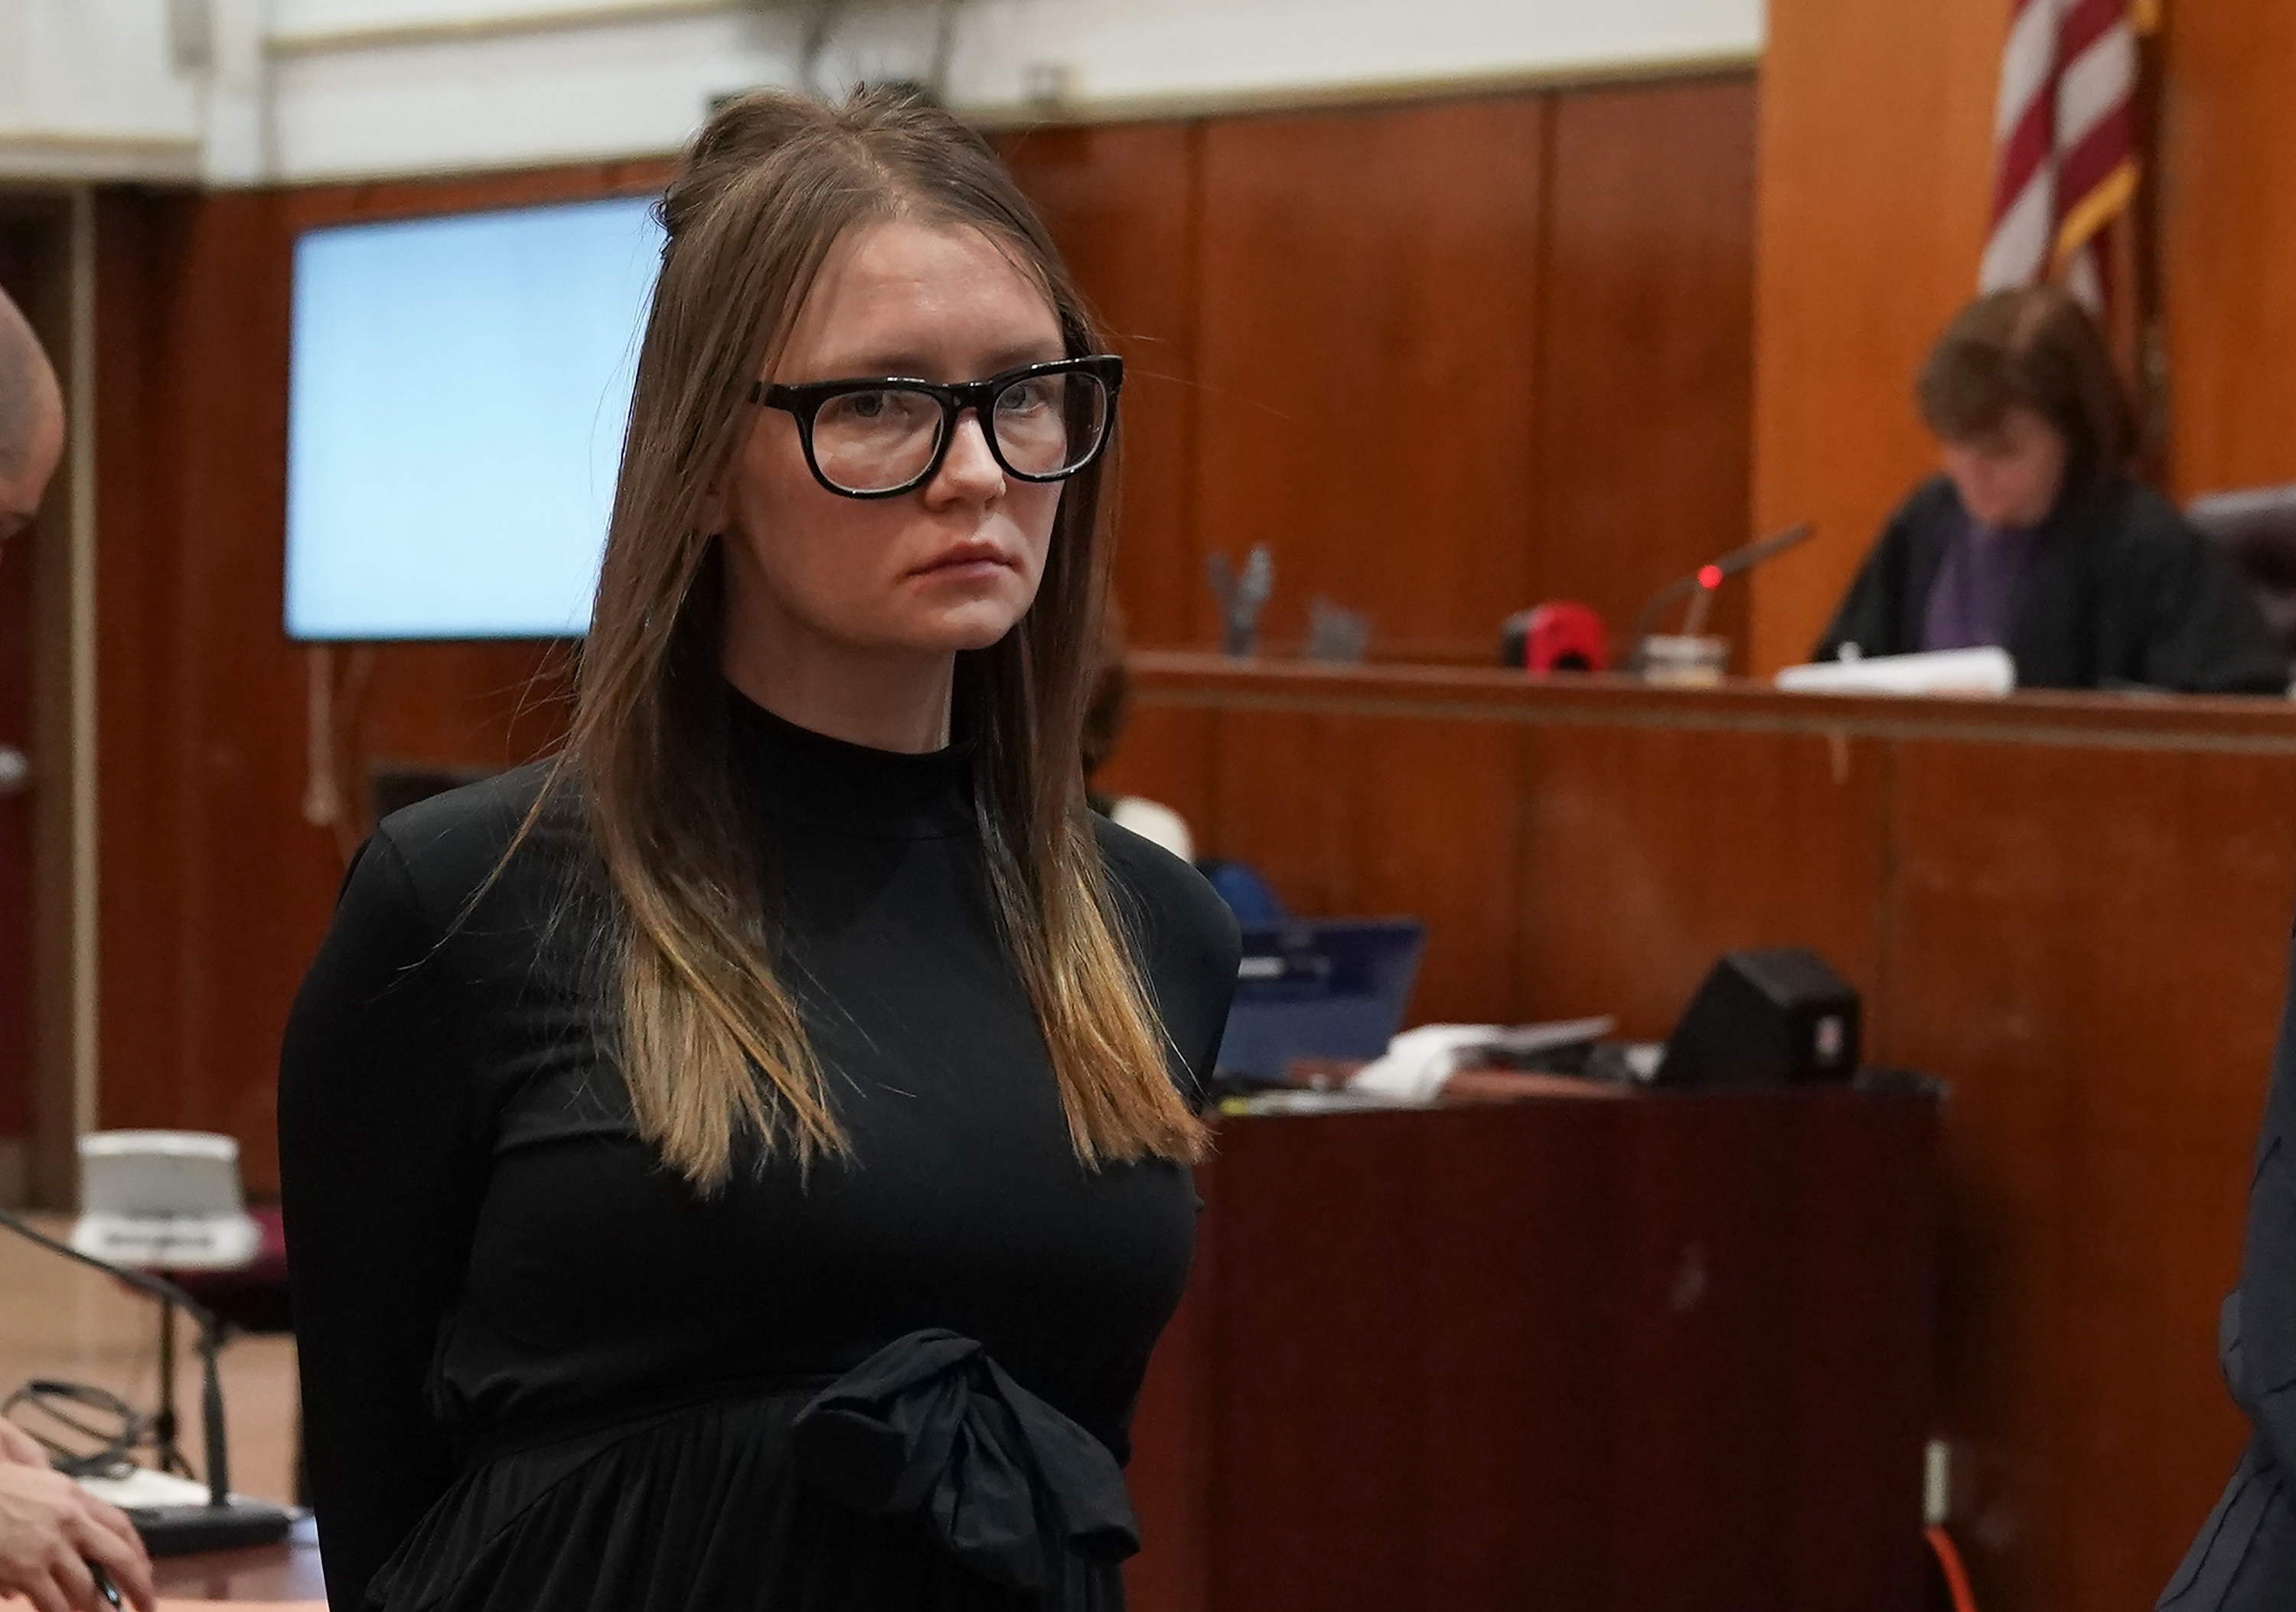 Anna Sorokin is led away after being sentenced in Manhattan Supreme Court in 2019 following her conviction on multiple counts of grand larceny and theft of services. Photo: AFP / Getty Images / TNS